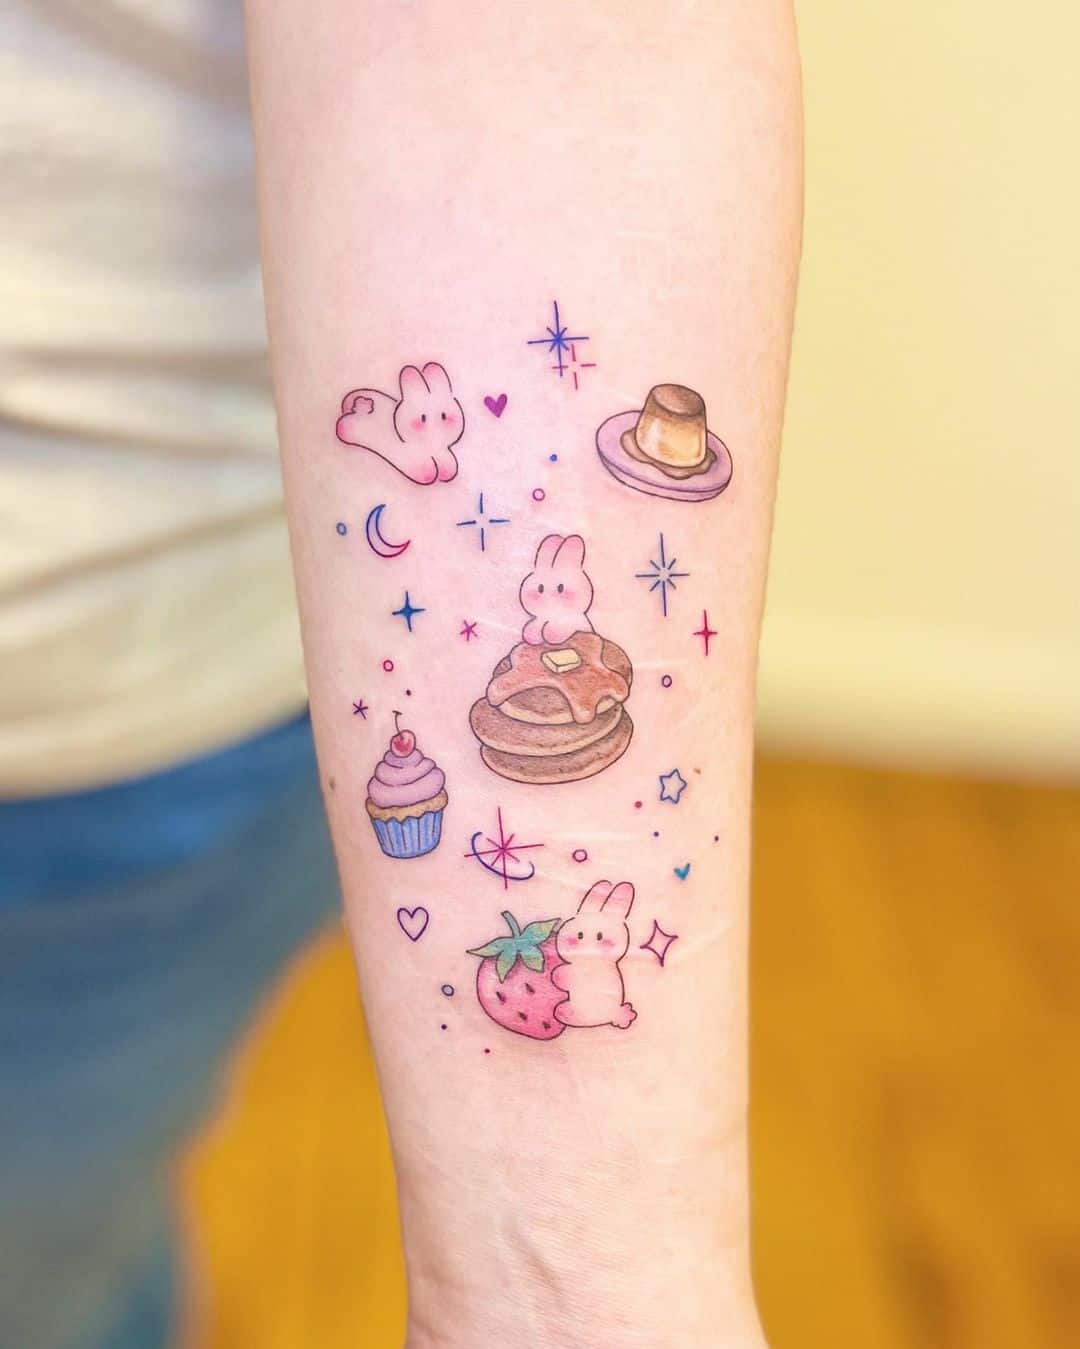 30 Delicious Food Tattoo Design To Try